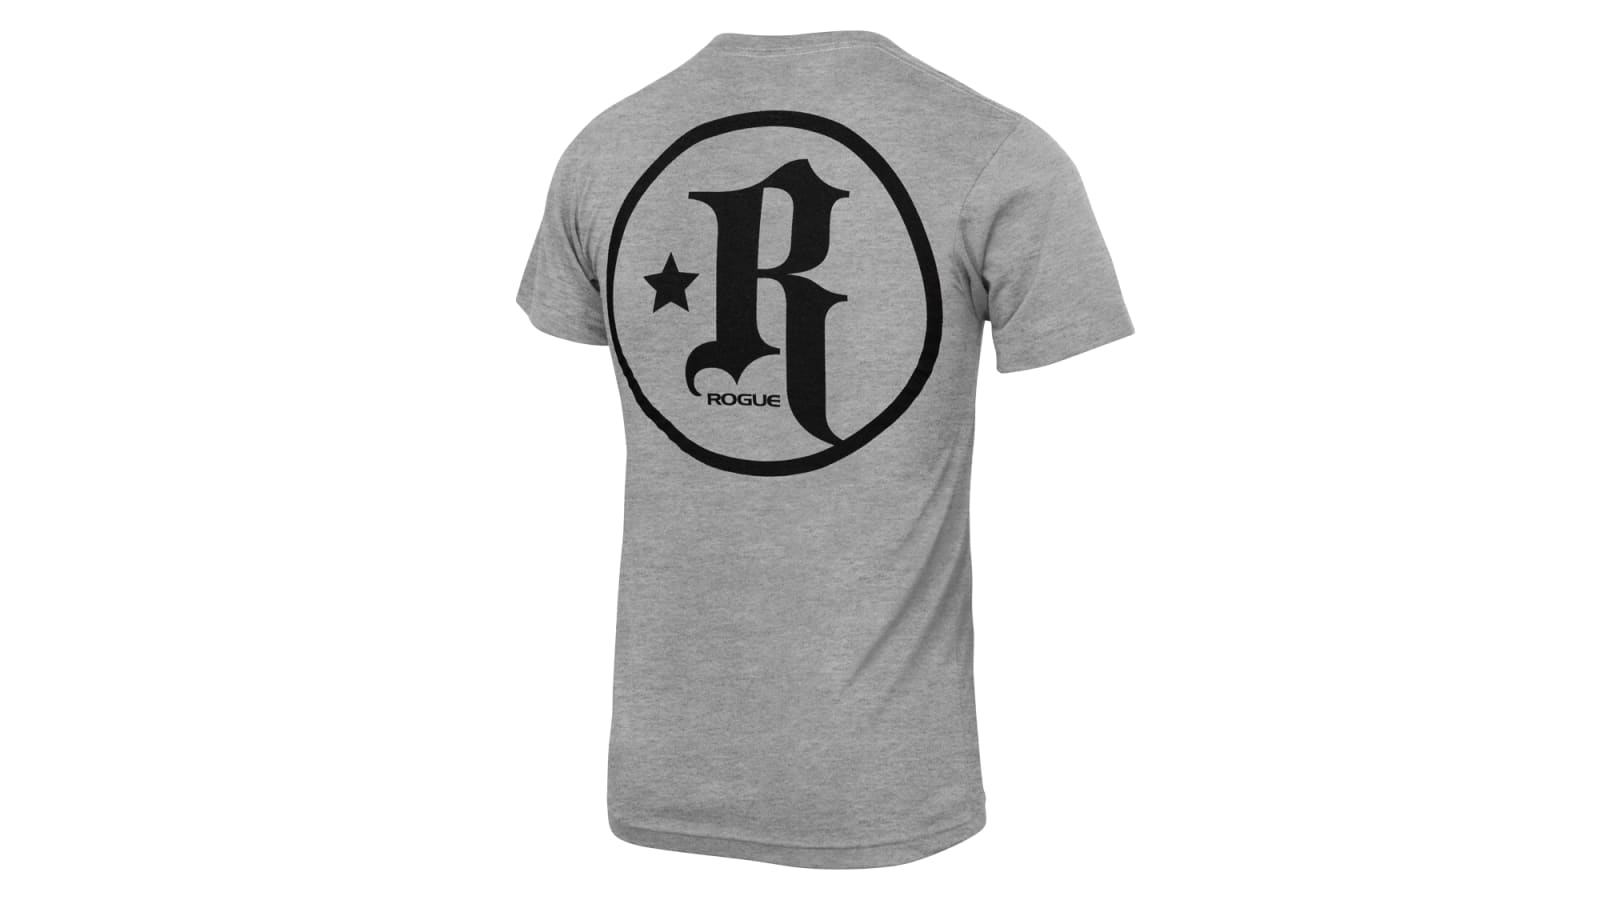 Rated R Men's Tee